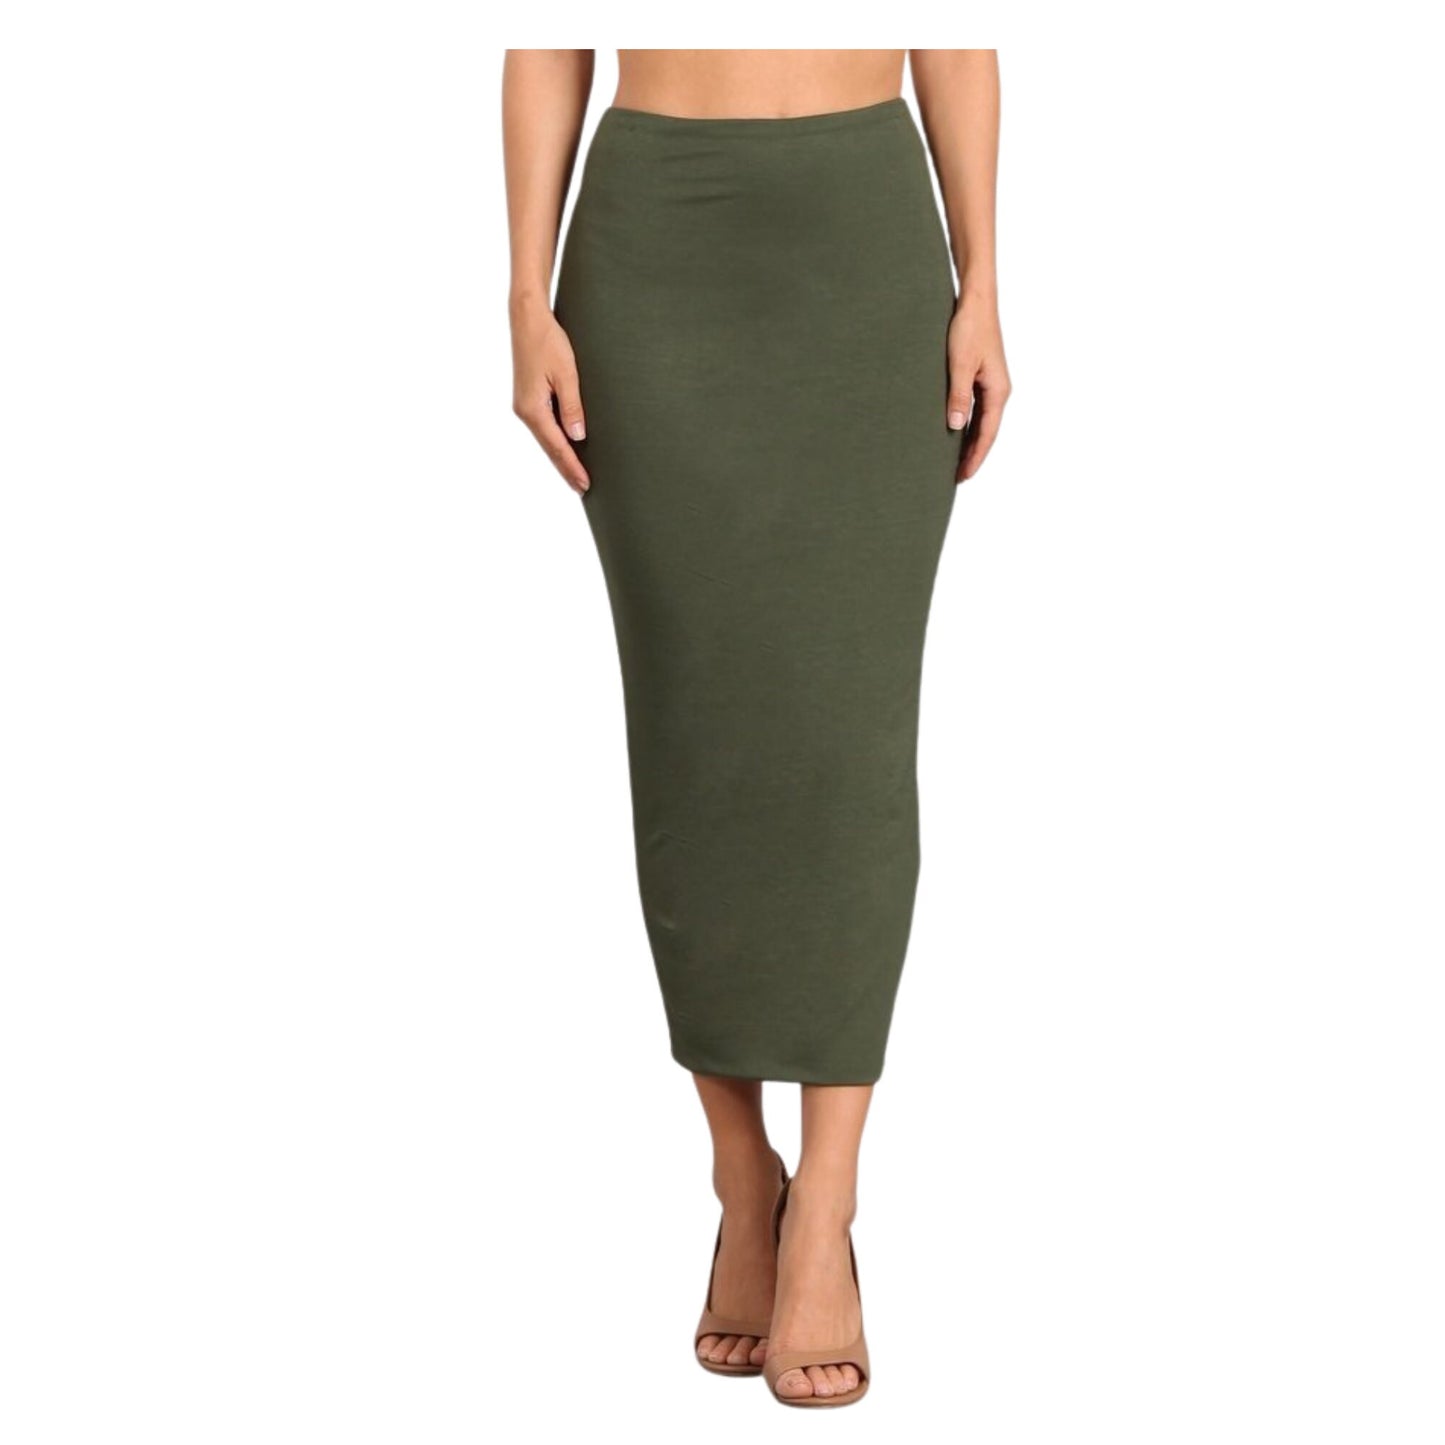 Various Colors. Bodycon Midi Skirt, Double Layer No Slit Long Midi Pencil Skirt. Super Sexy Great Silhouette. Not See Thru. Great Stretch.